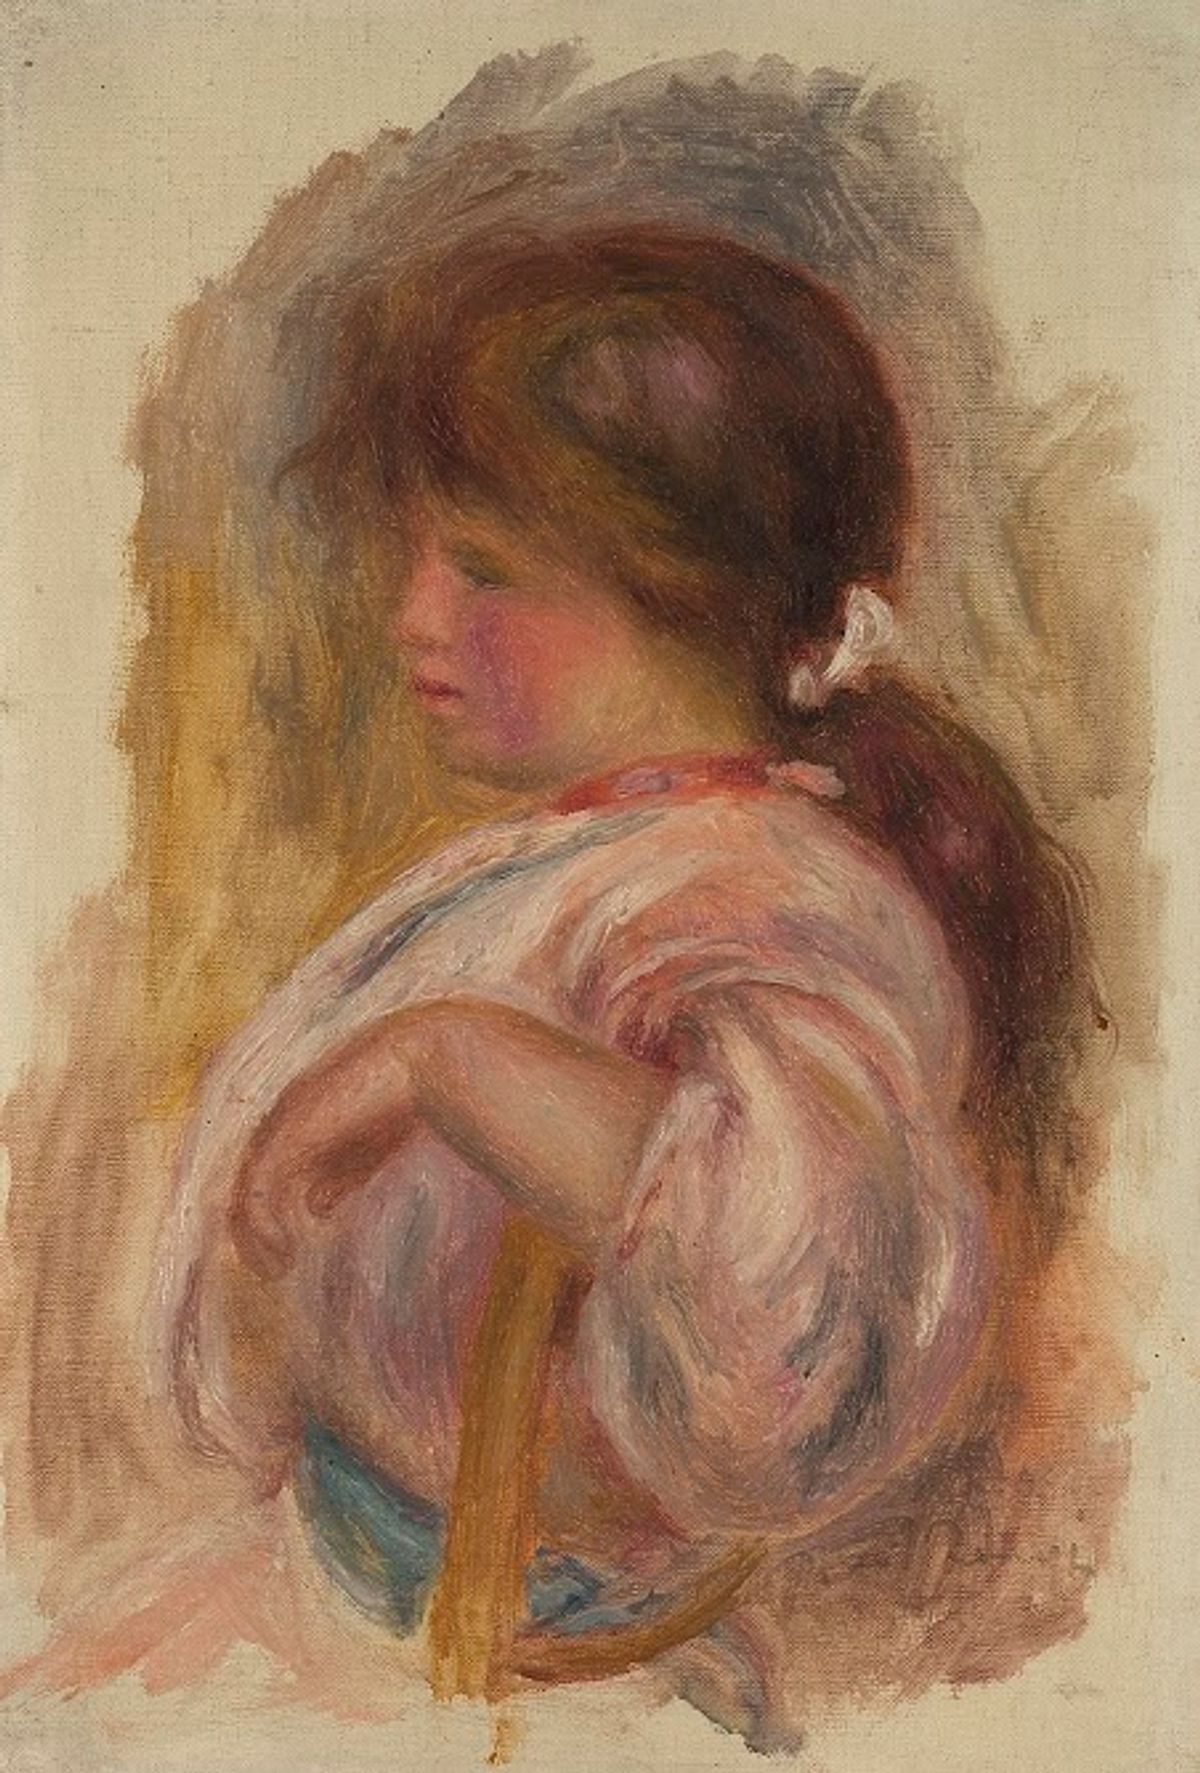 Little is known about the identity of the child sitter, though experts believe they are not a "pure figment of Renoir's imagination" 